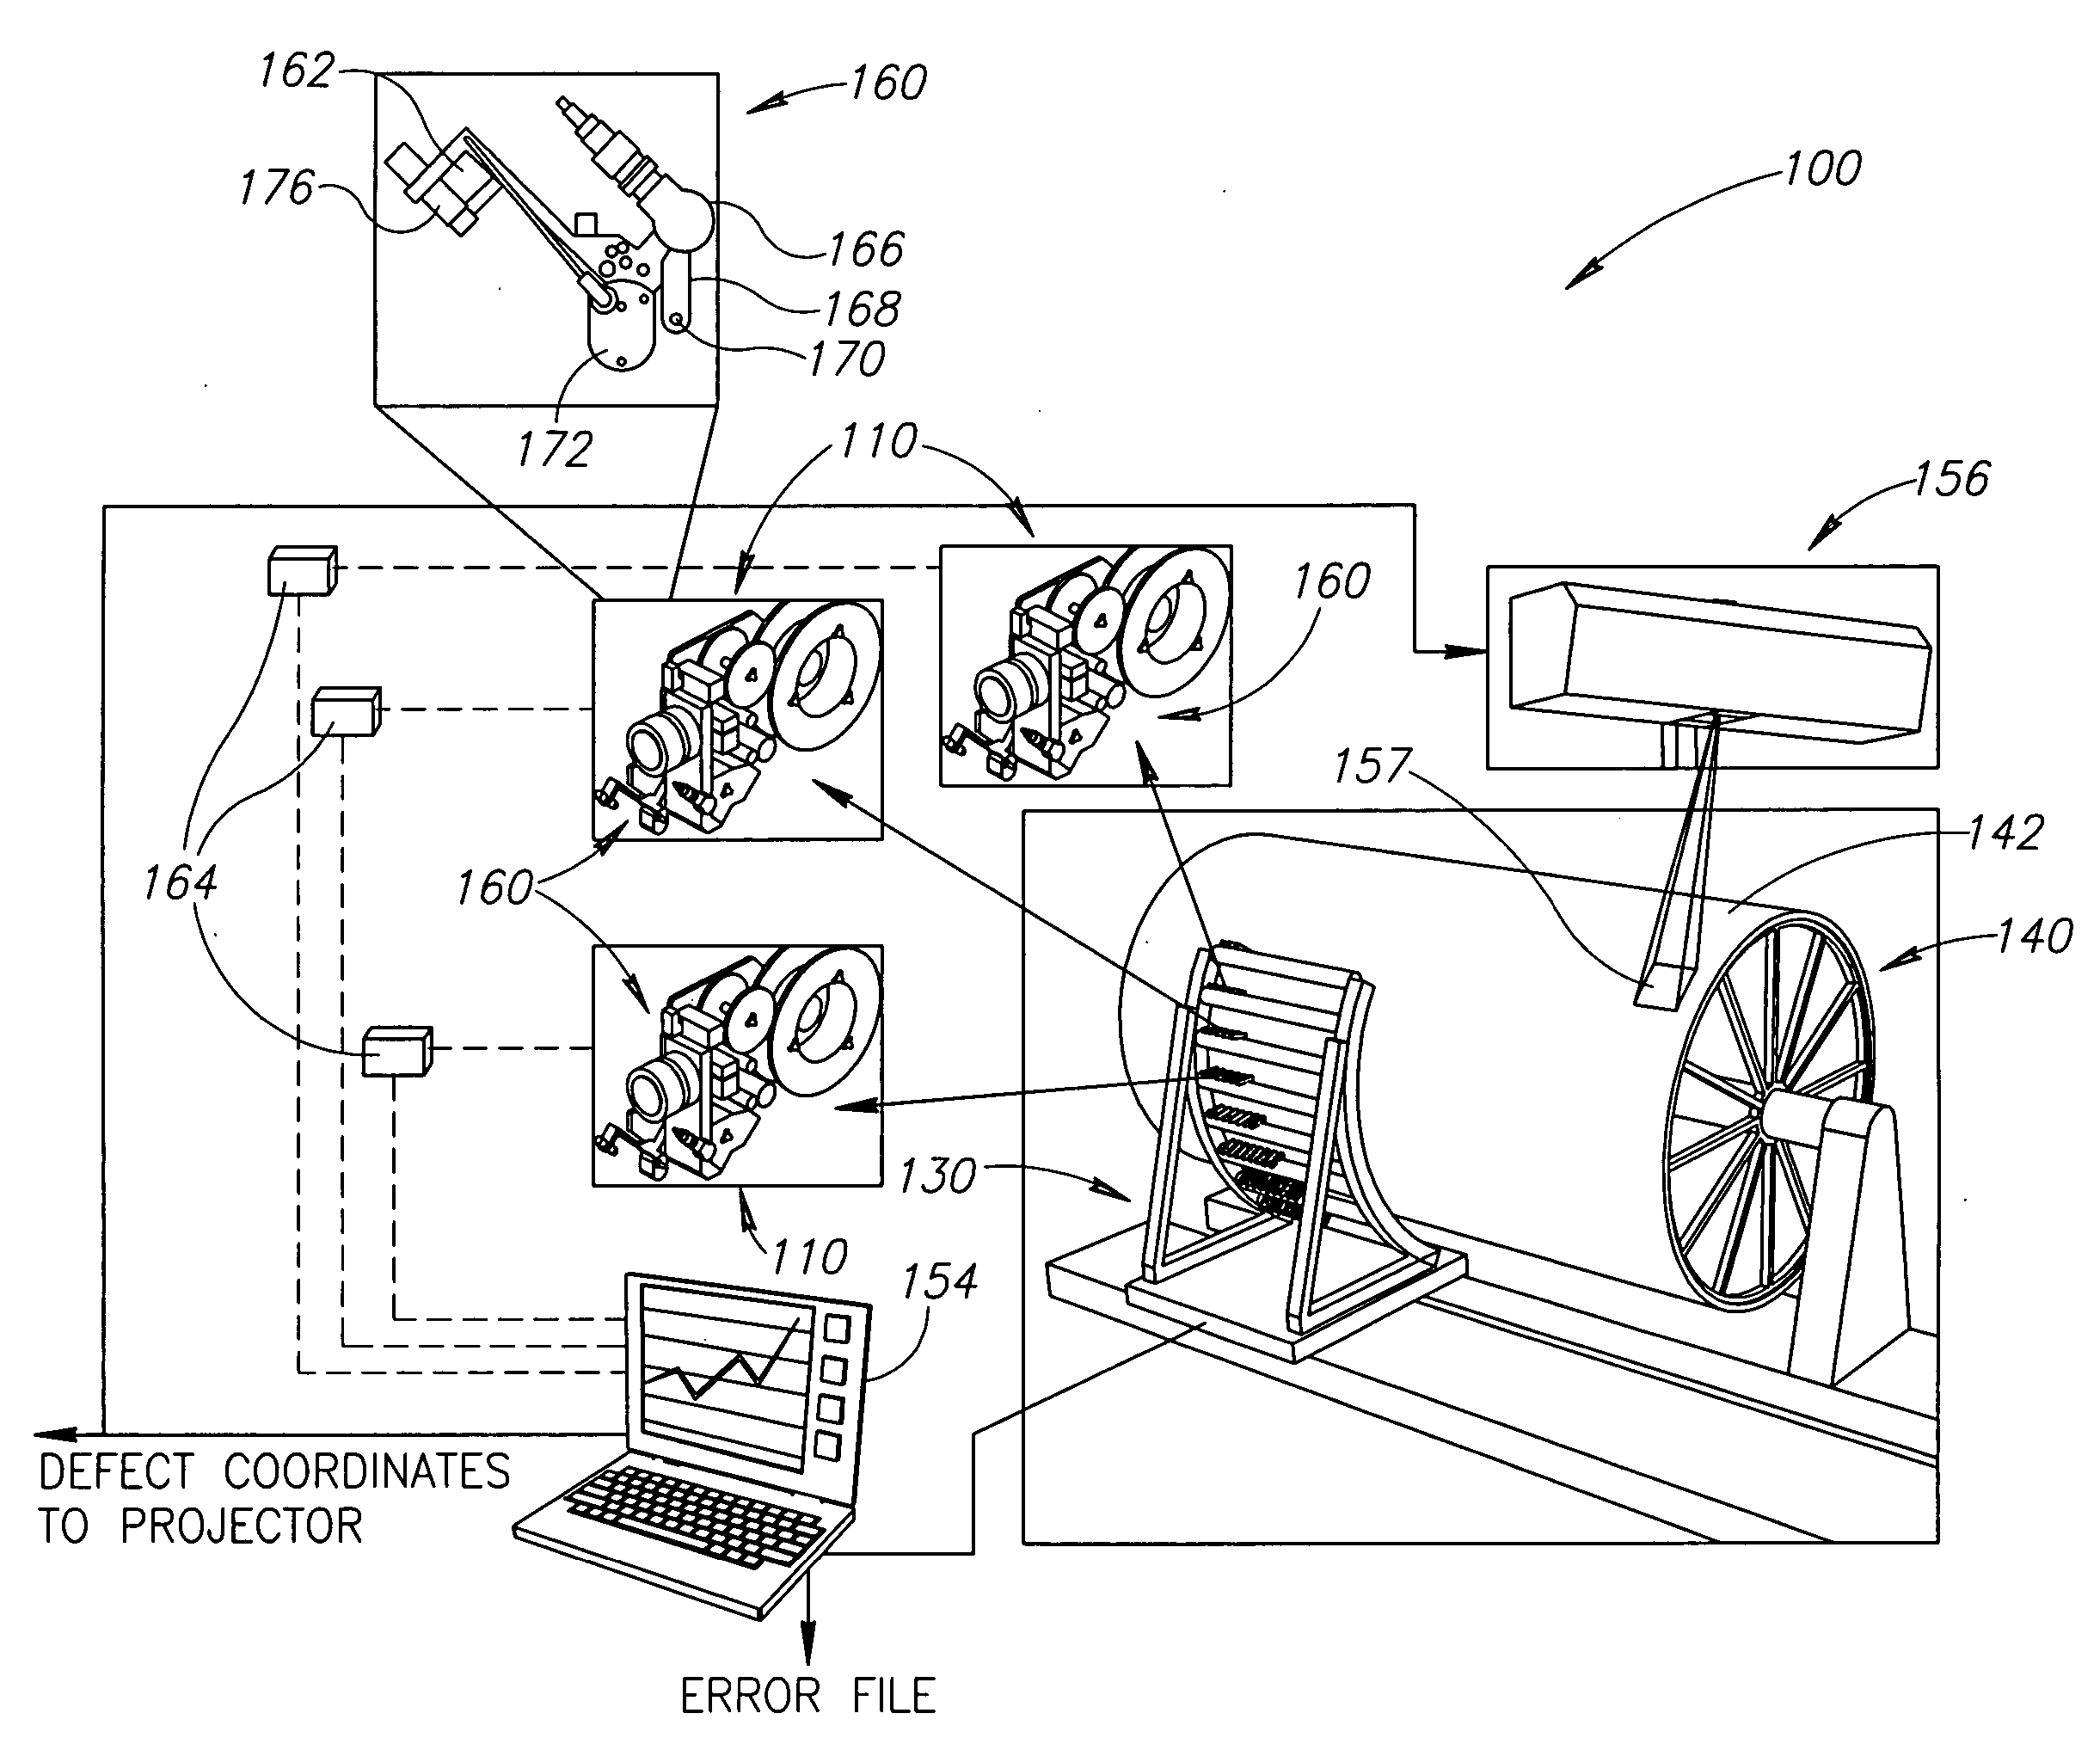 Systems and methods for in-process vision inspection for automated machines